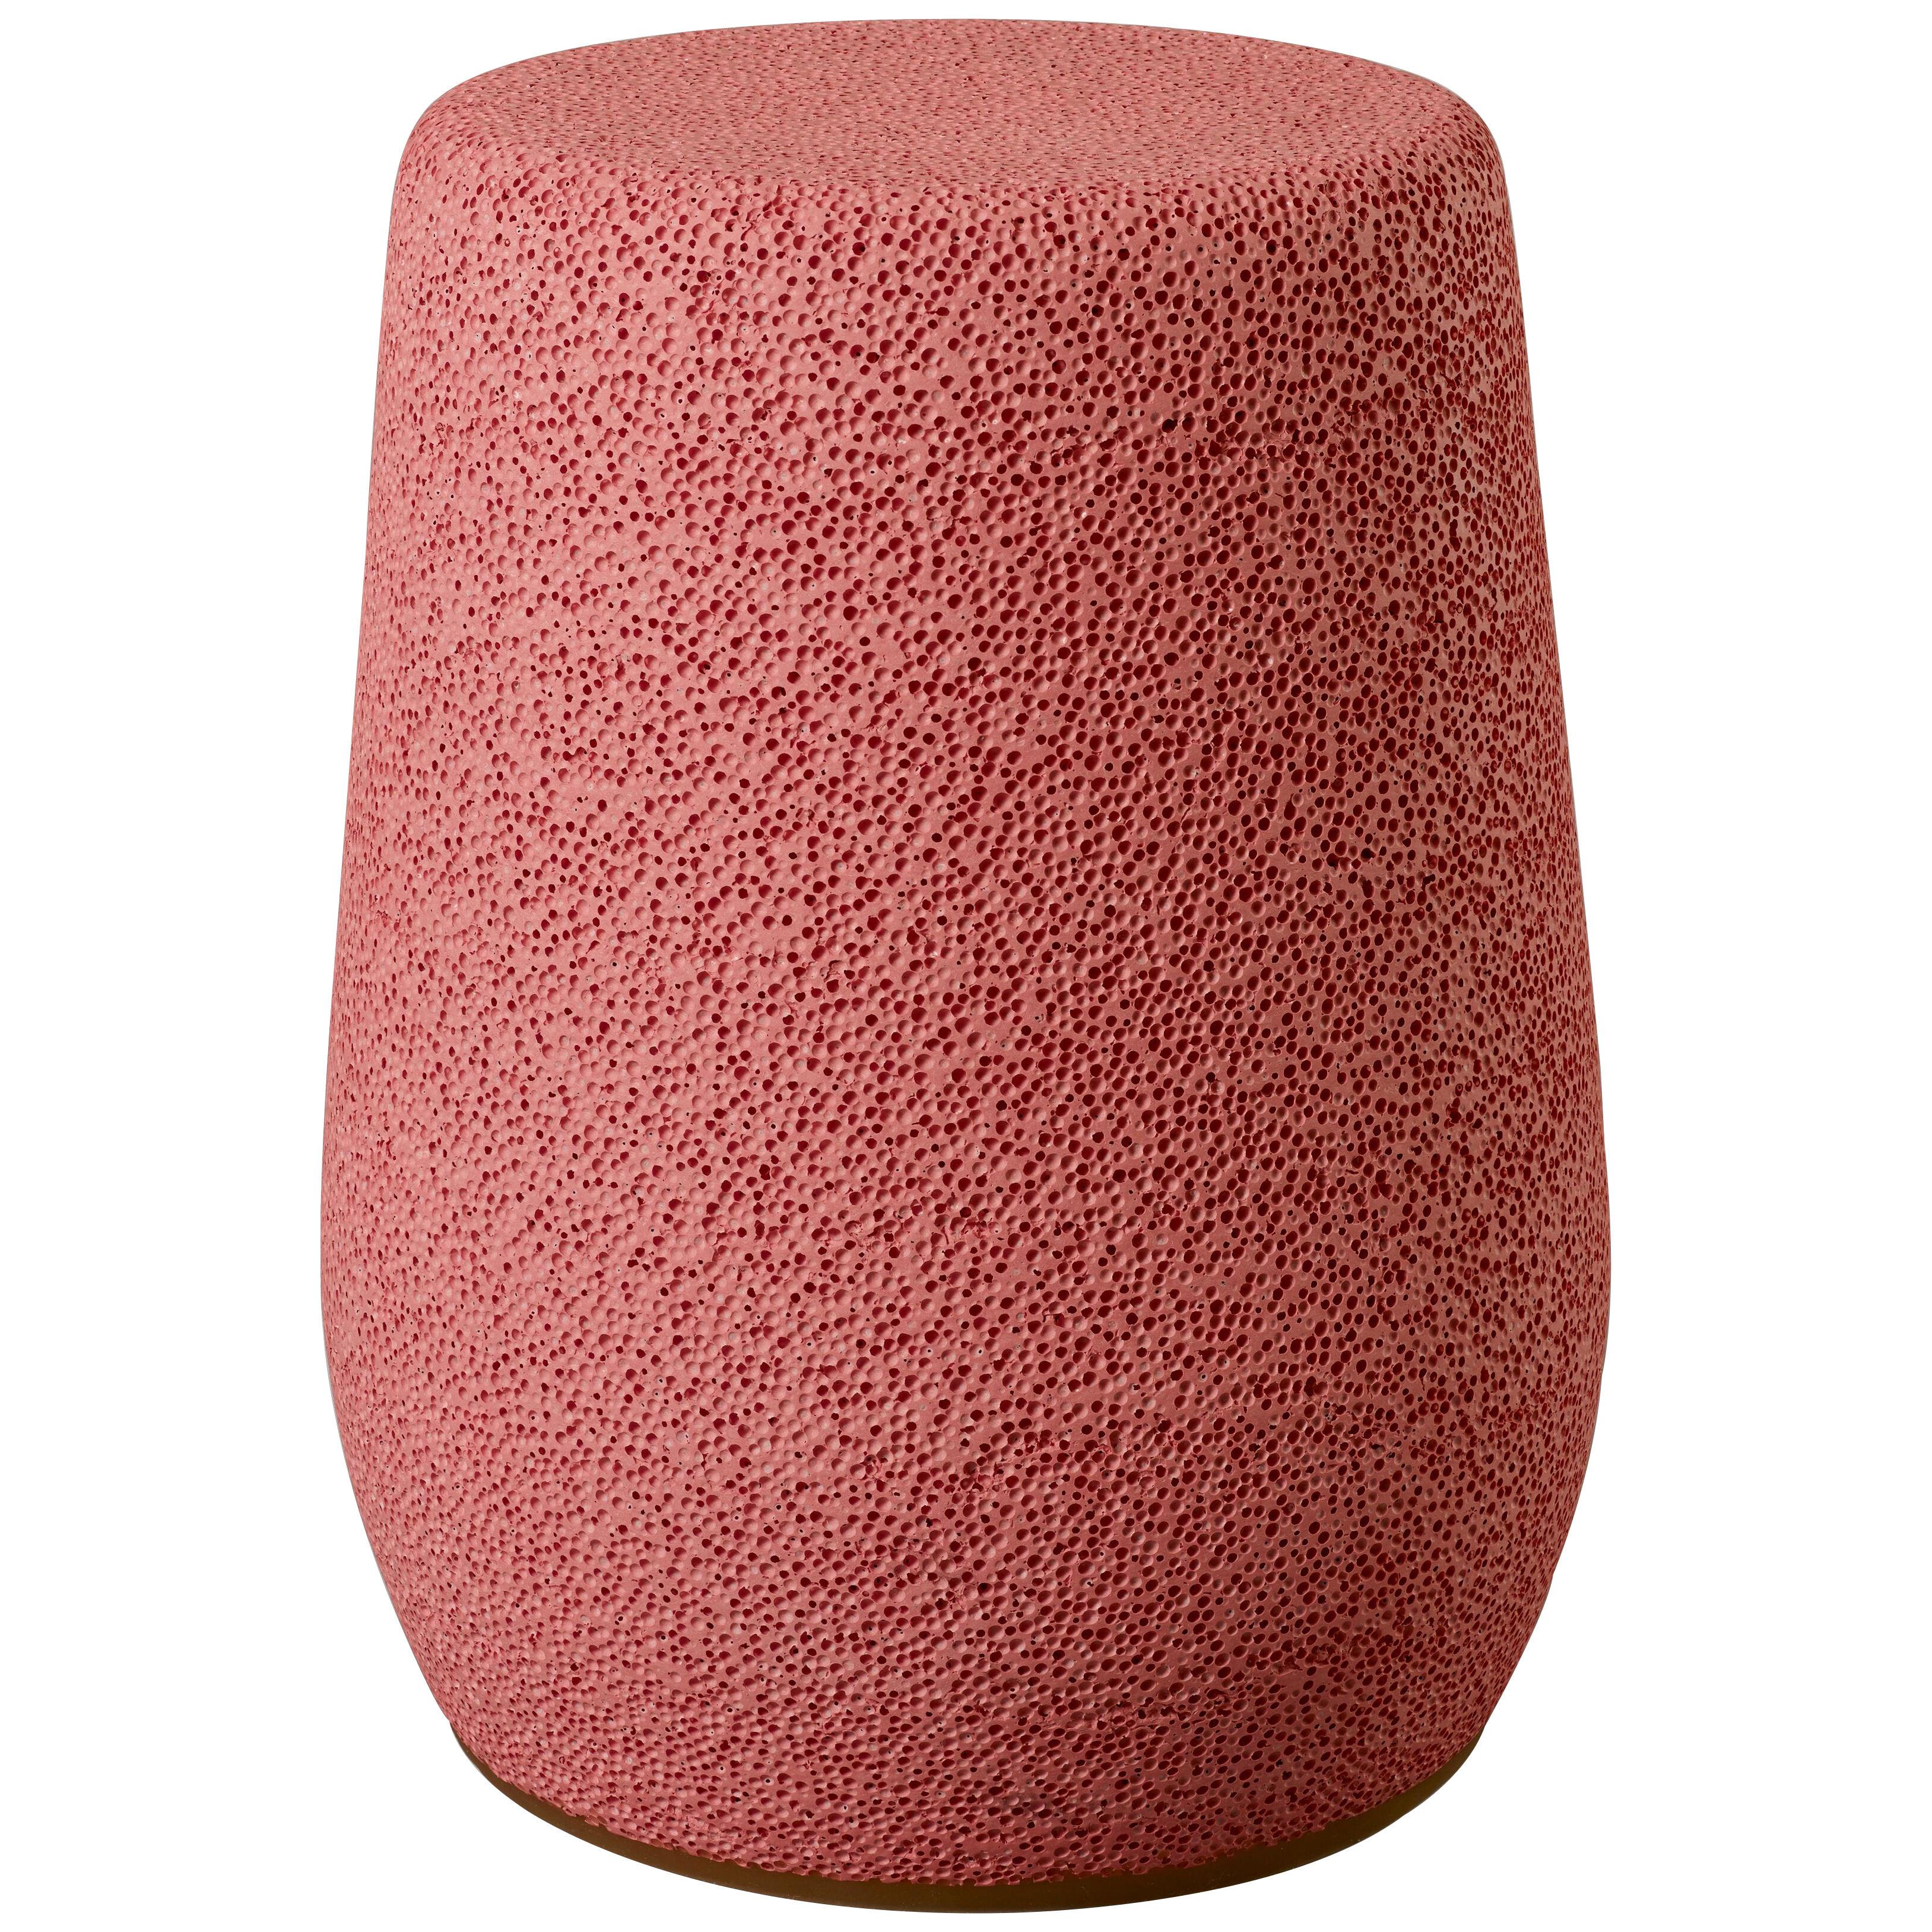 'Lightweight Porcelain' Stool and Side Table (Lipstick-LP19)